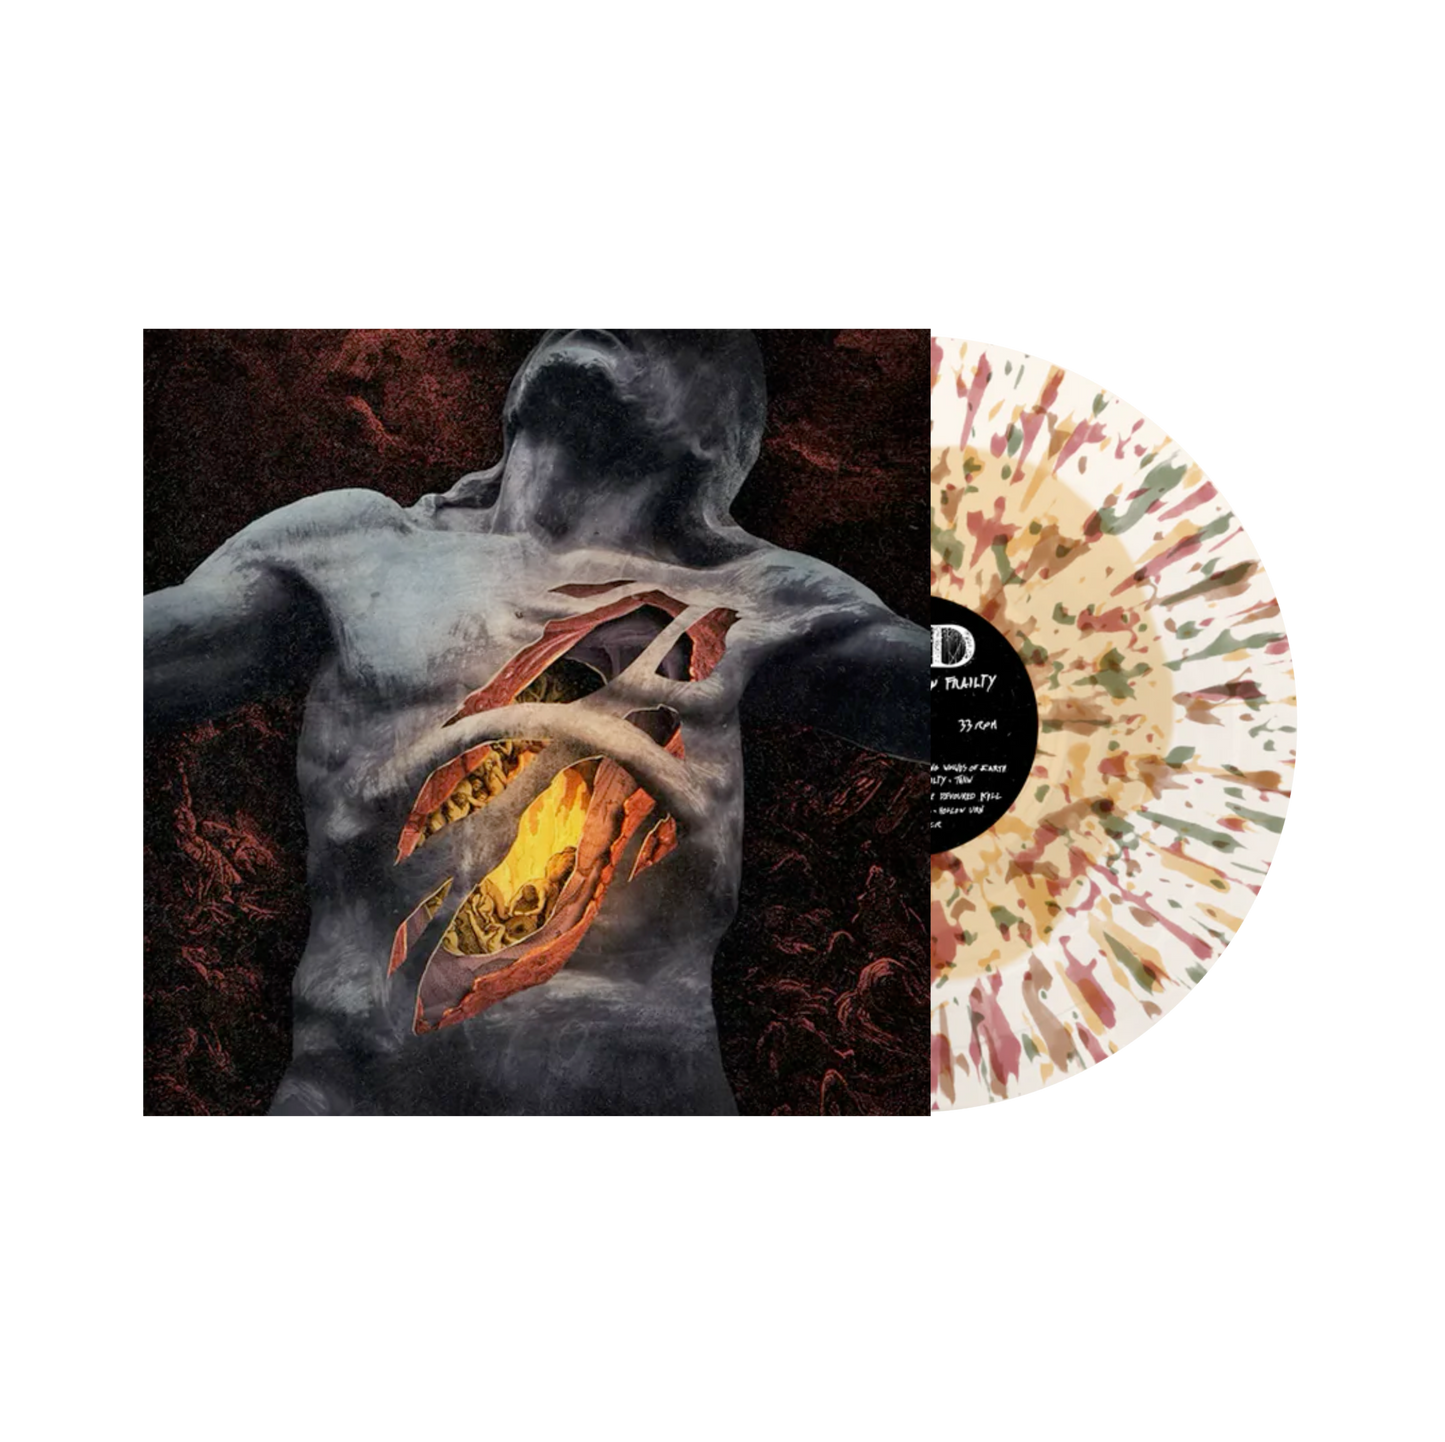 END  "The Sin Of Human Frailty” LP